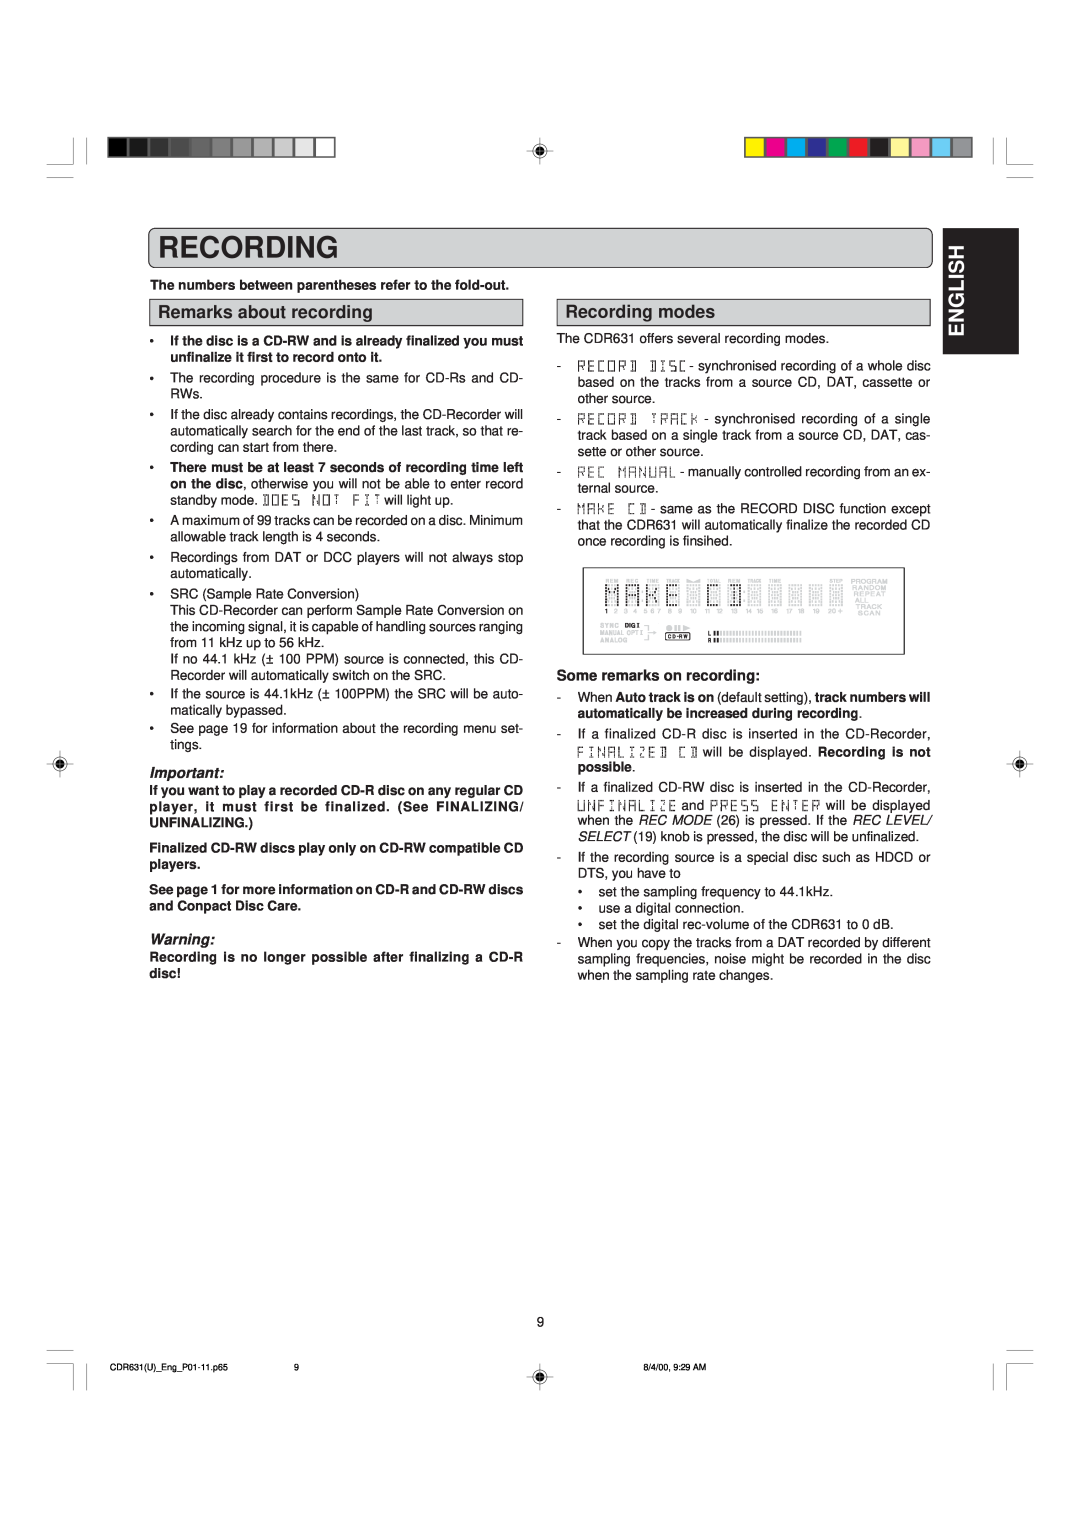 Marantz CDR631 manual English, Remarks about recording, Recording modes, Some remarks on recording 